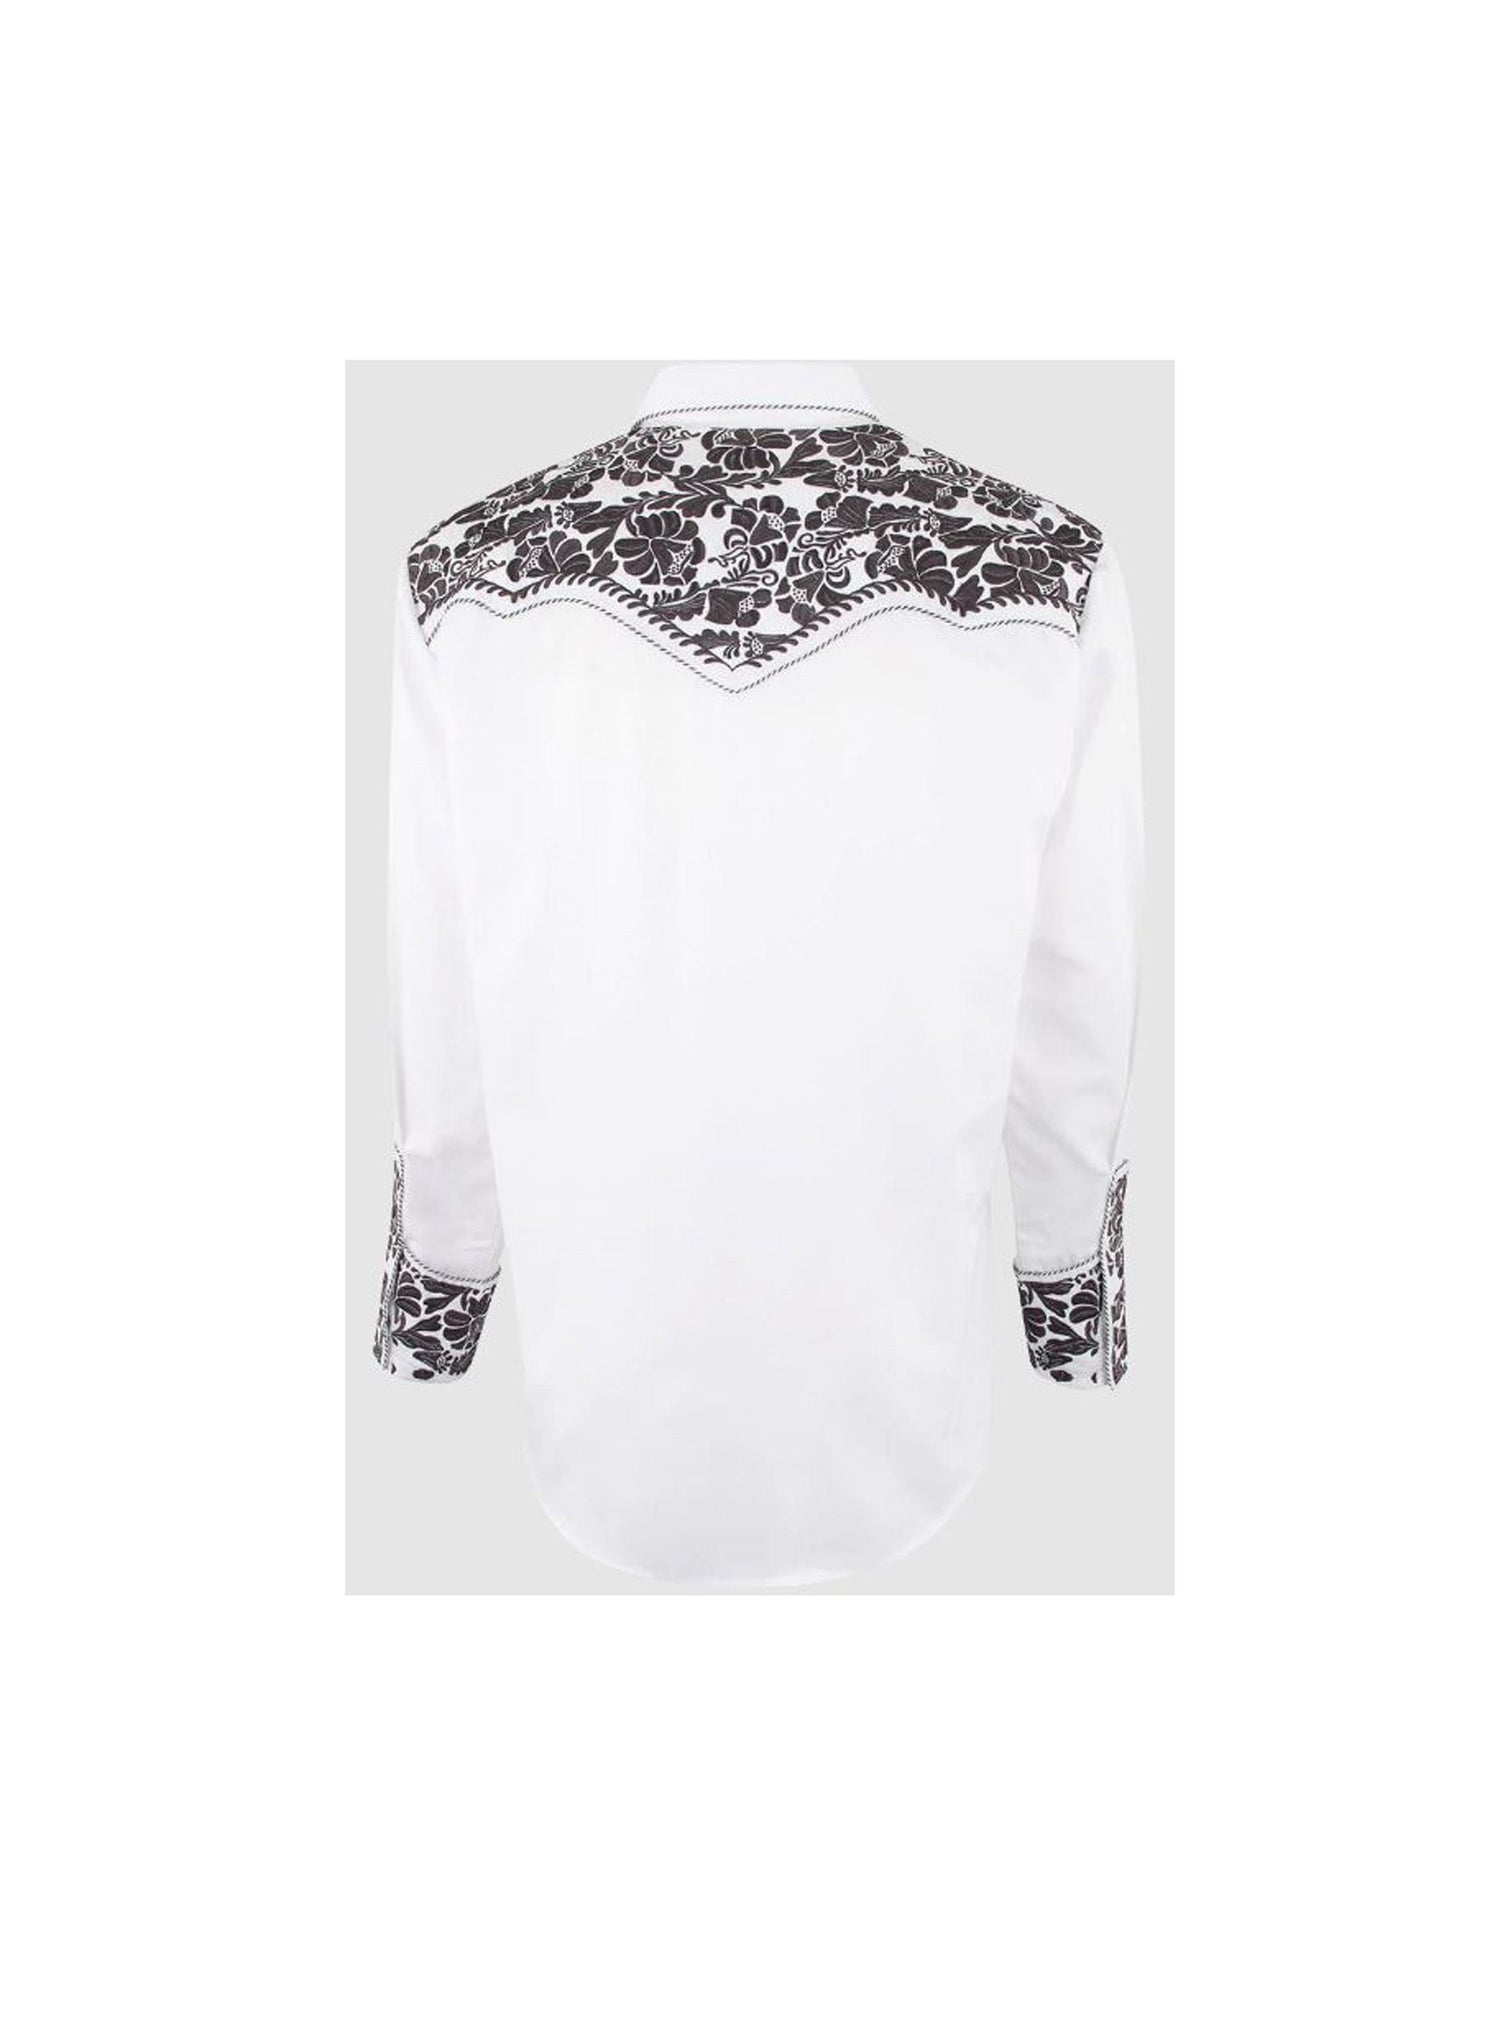 Men's Classic Floral Embroidery Western Snap Shirt